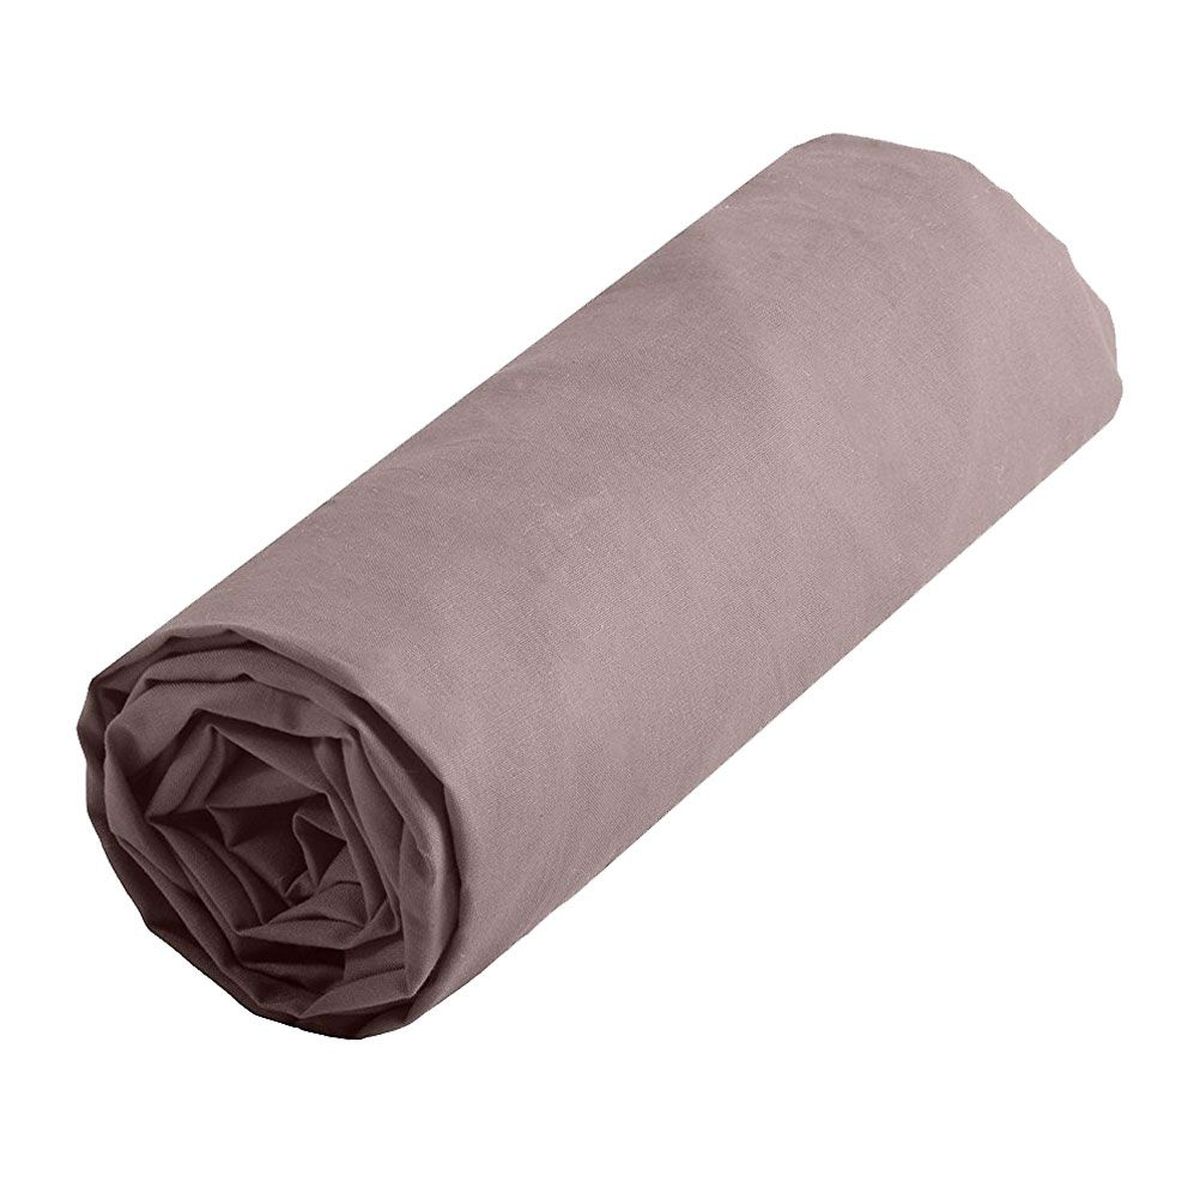 Fitted sheet brown 140 x 190 cm